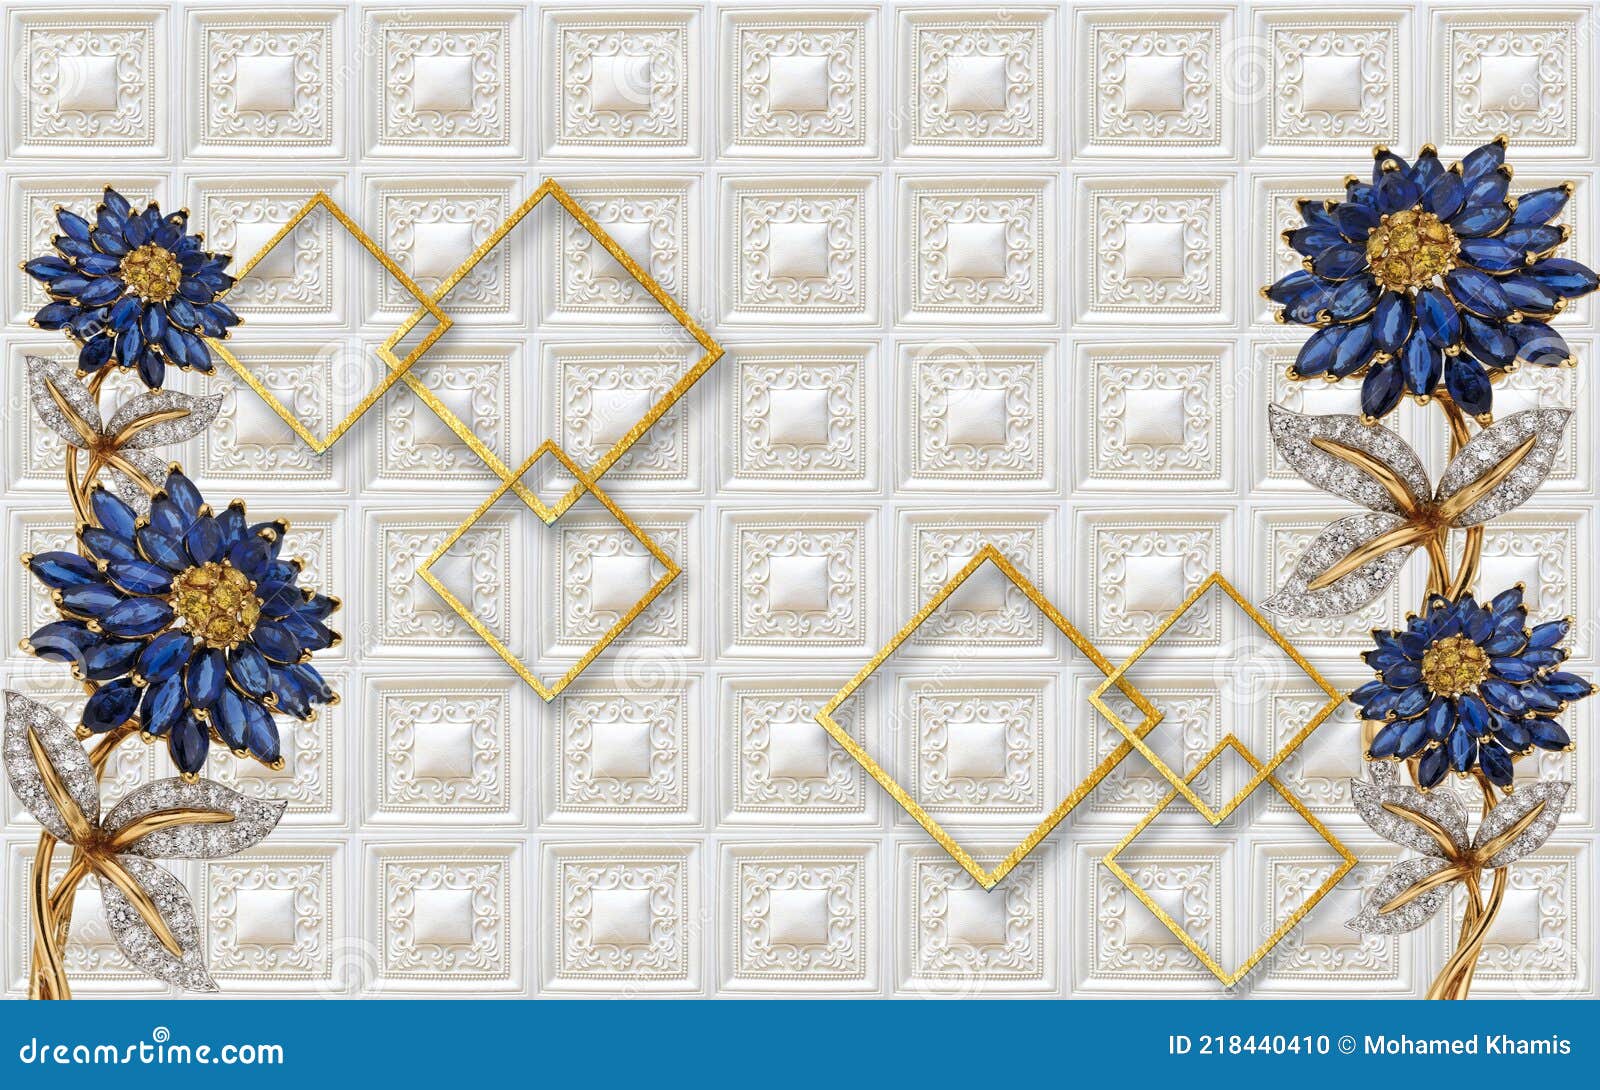 3d wallpaper blue diamond flowers with golden branches leather background